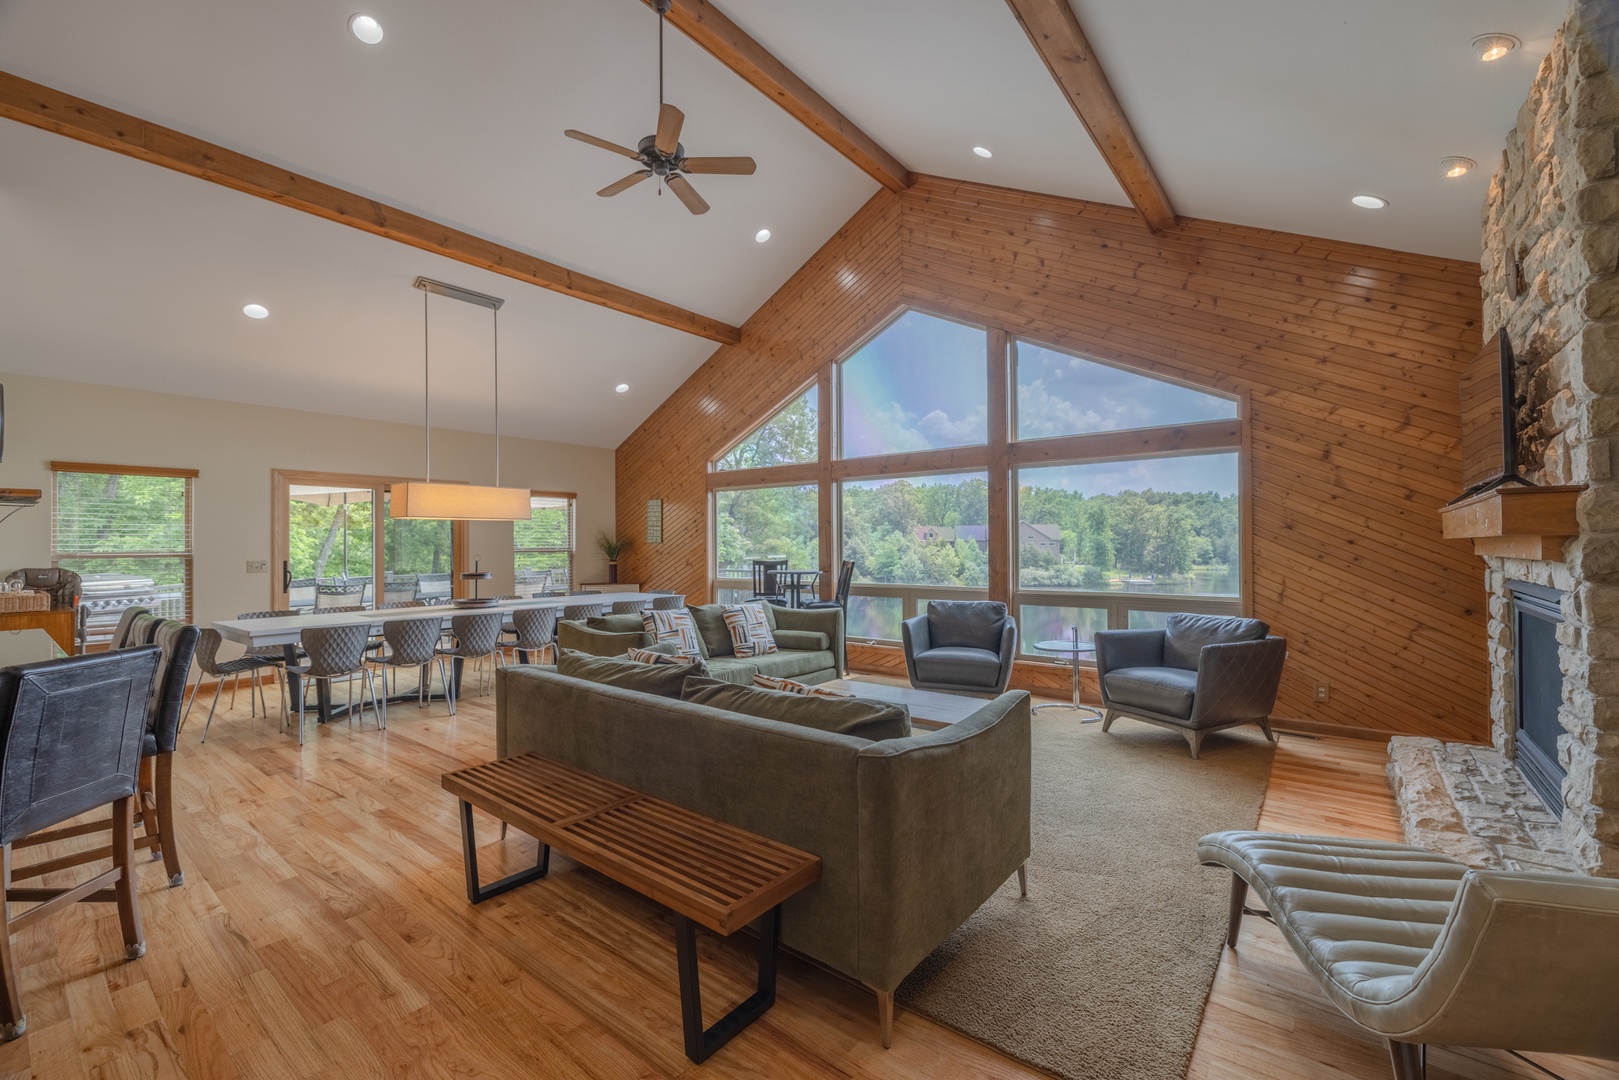 Spacious, open living area with an expansive wall of windows overlooking Lake Charrette